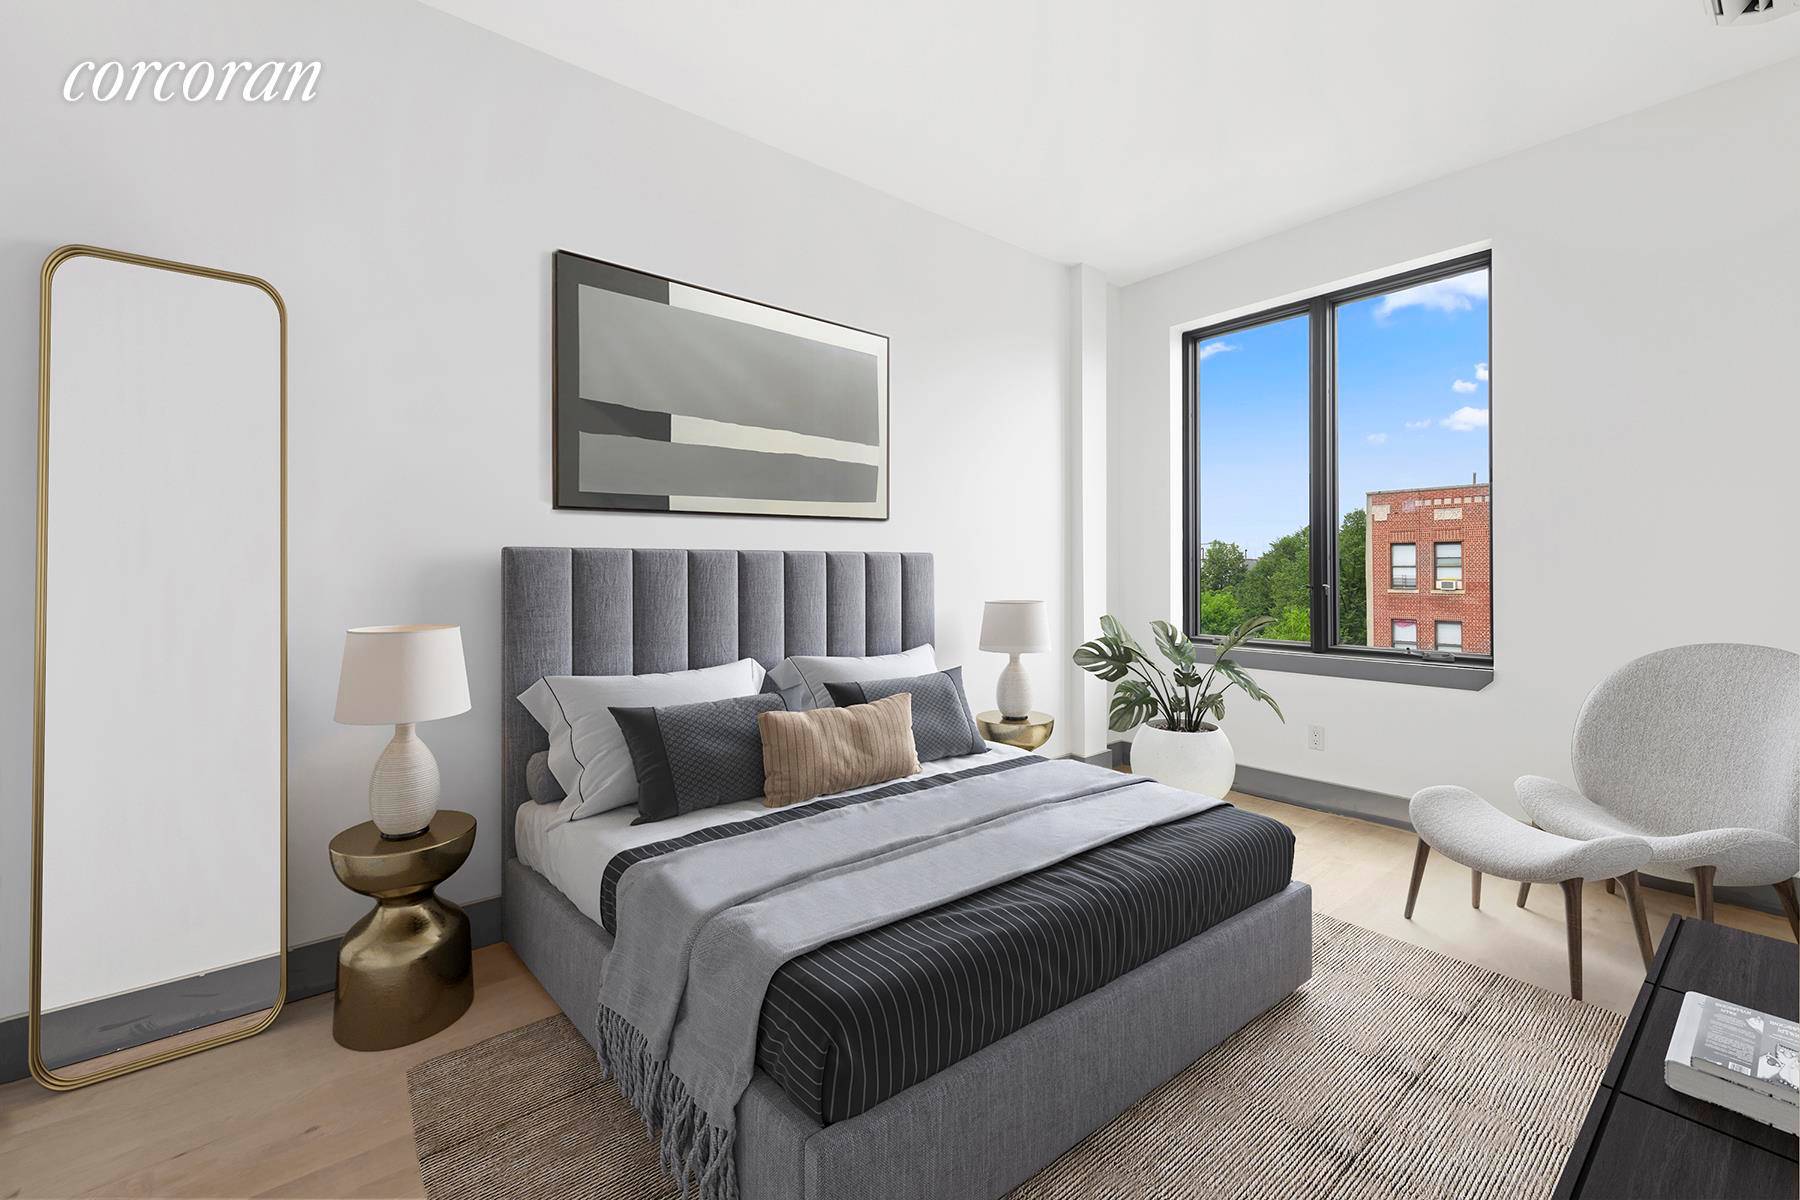 Built with an eye towards design, the newly constructed condominiums at 1490 St Johns Place, are located in the historic Weeksville area of Crown Heights.